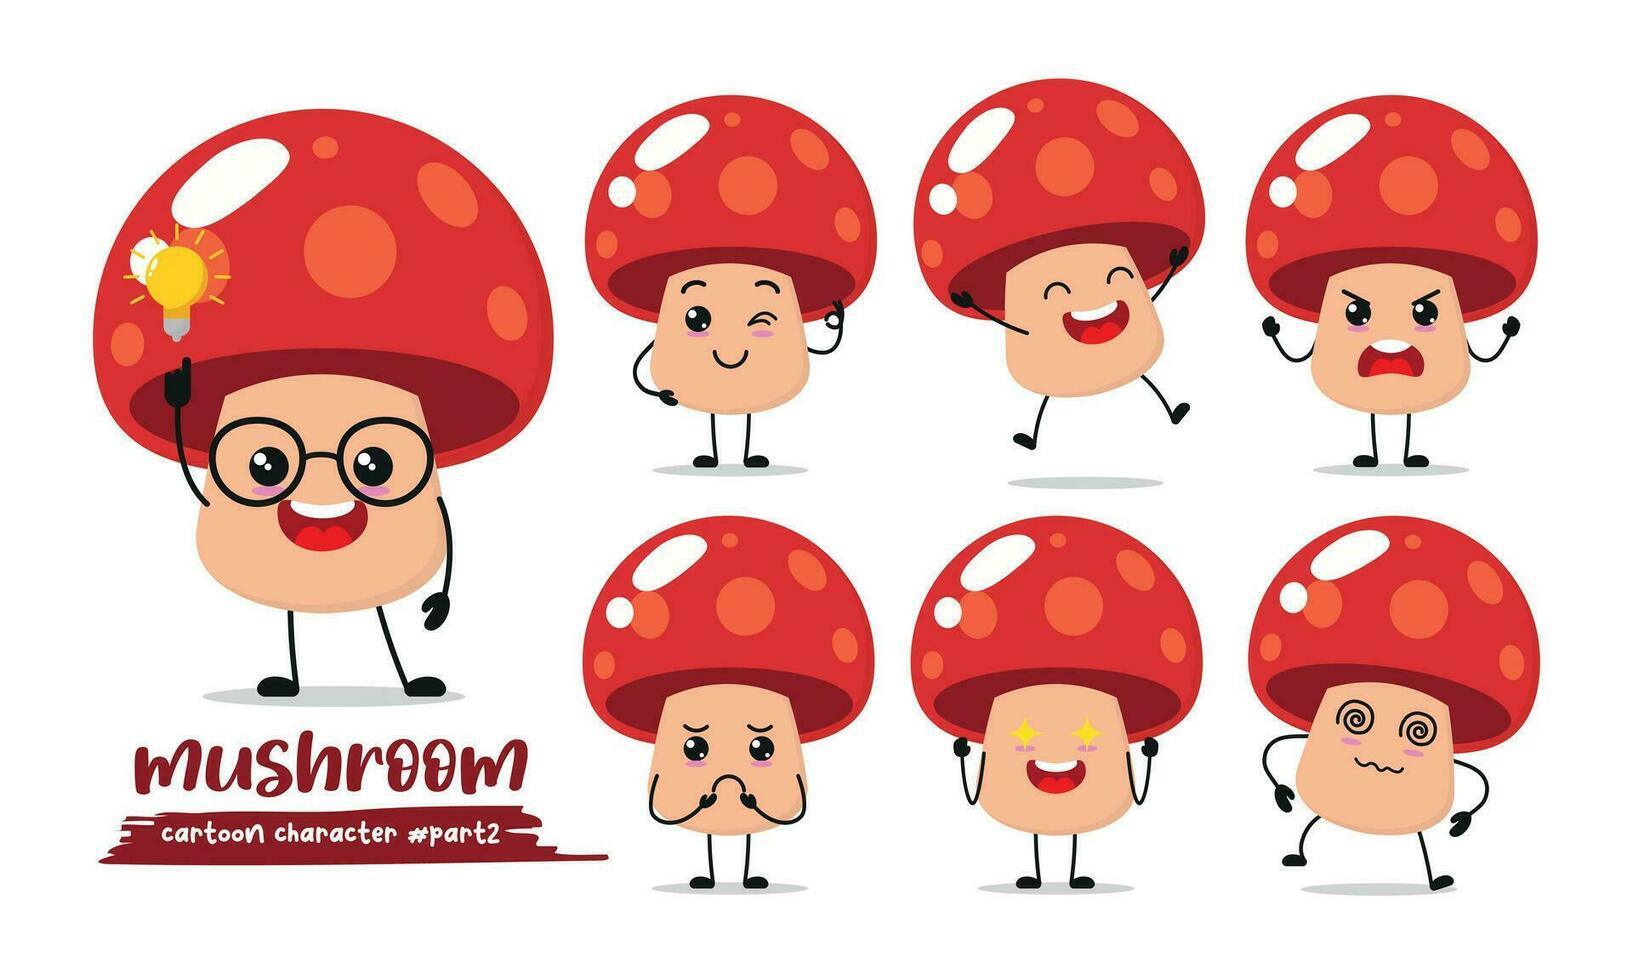 cute mushroom cartoon with many expressions. fungi different activity pose vector illustration flat design set.